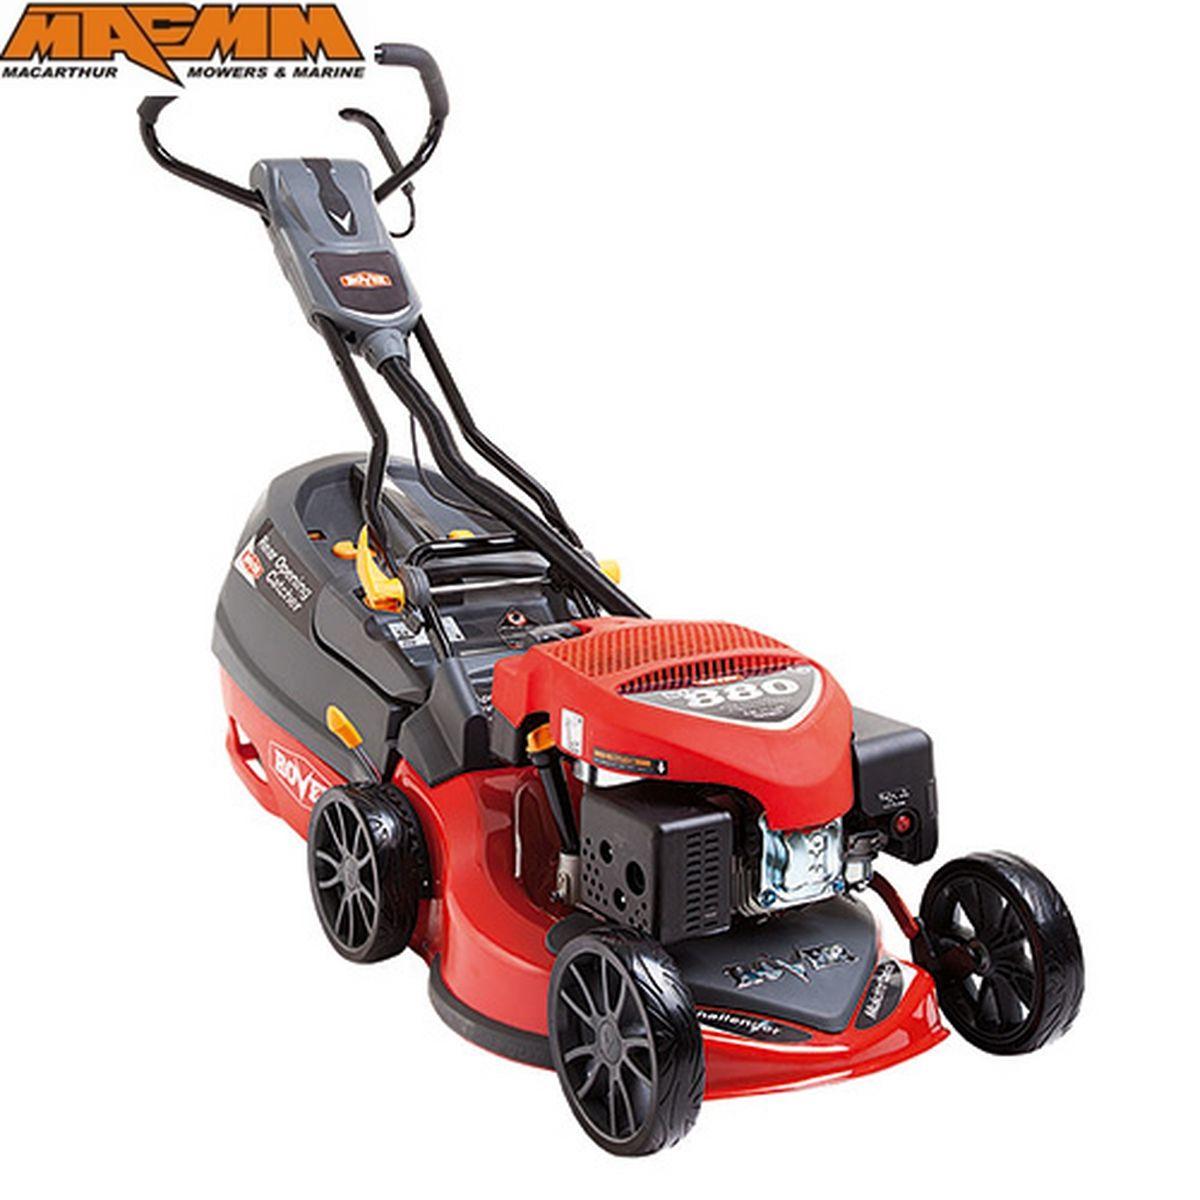 Rover Mowers Logo - Rover Challenger MnC 18 Inch Lawn Mower With Rover OHV 880 4 Stroke